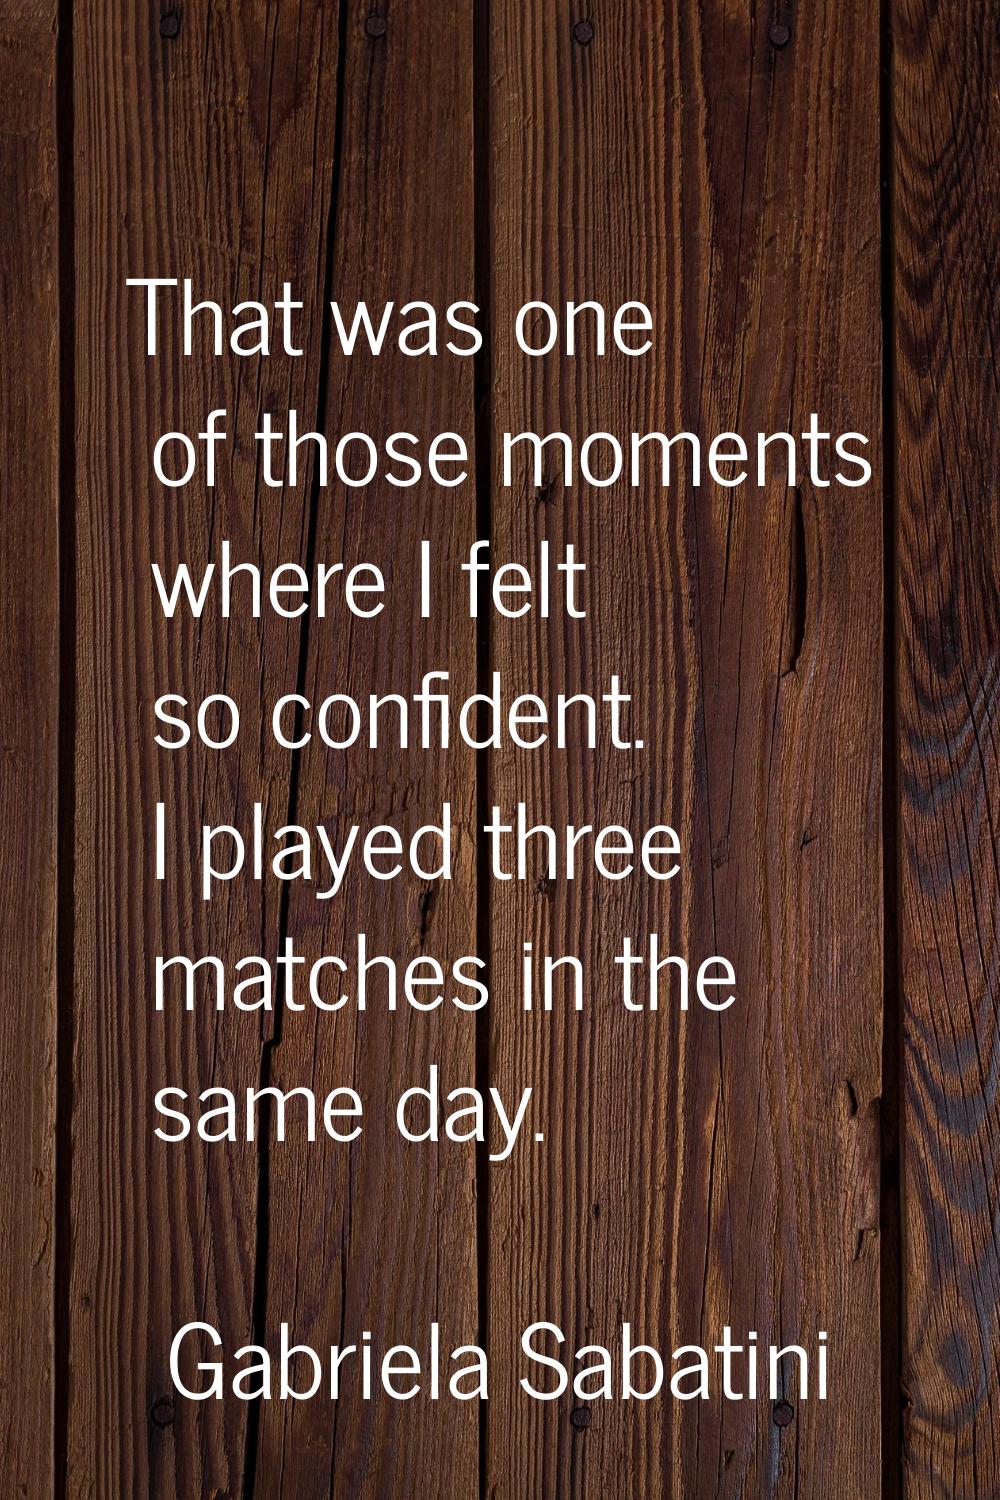 That was one of those moments where I felt so confident. I played three matches in the same day.